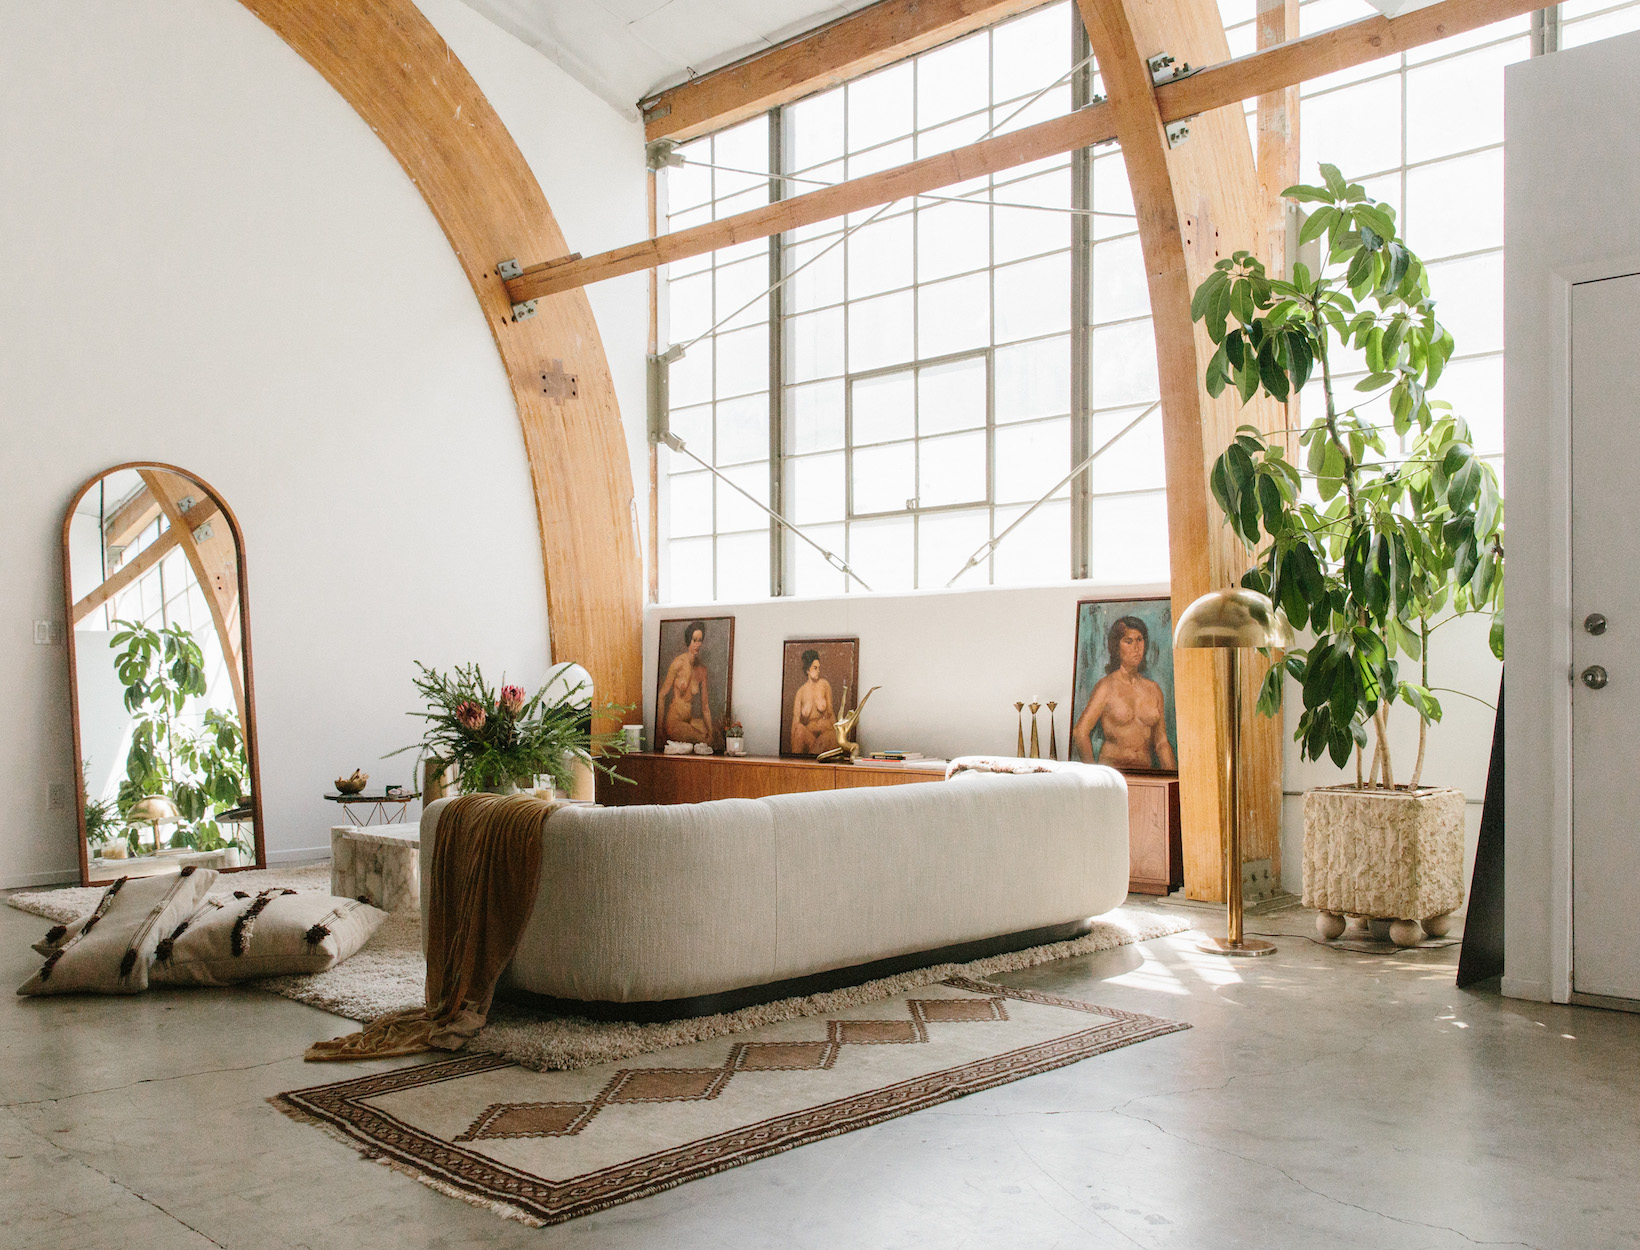 What goop Staffers Want for Their Homes